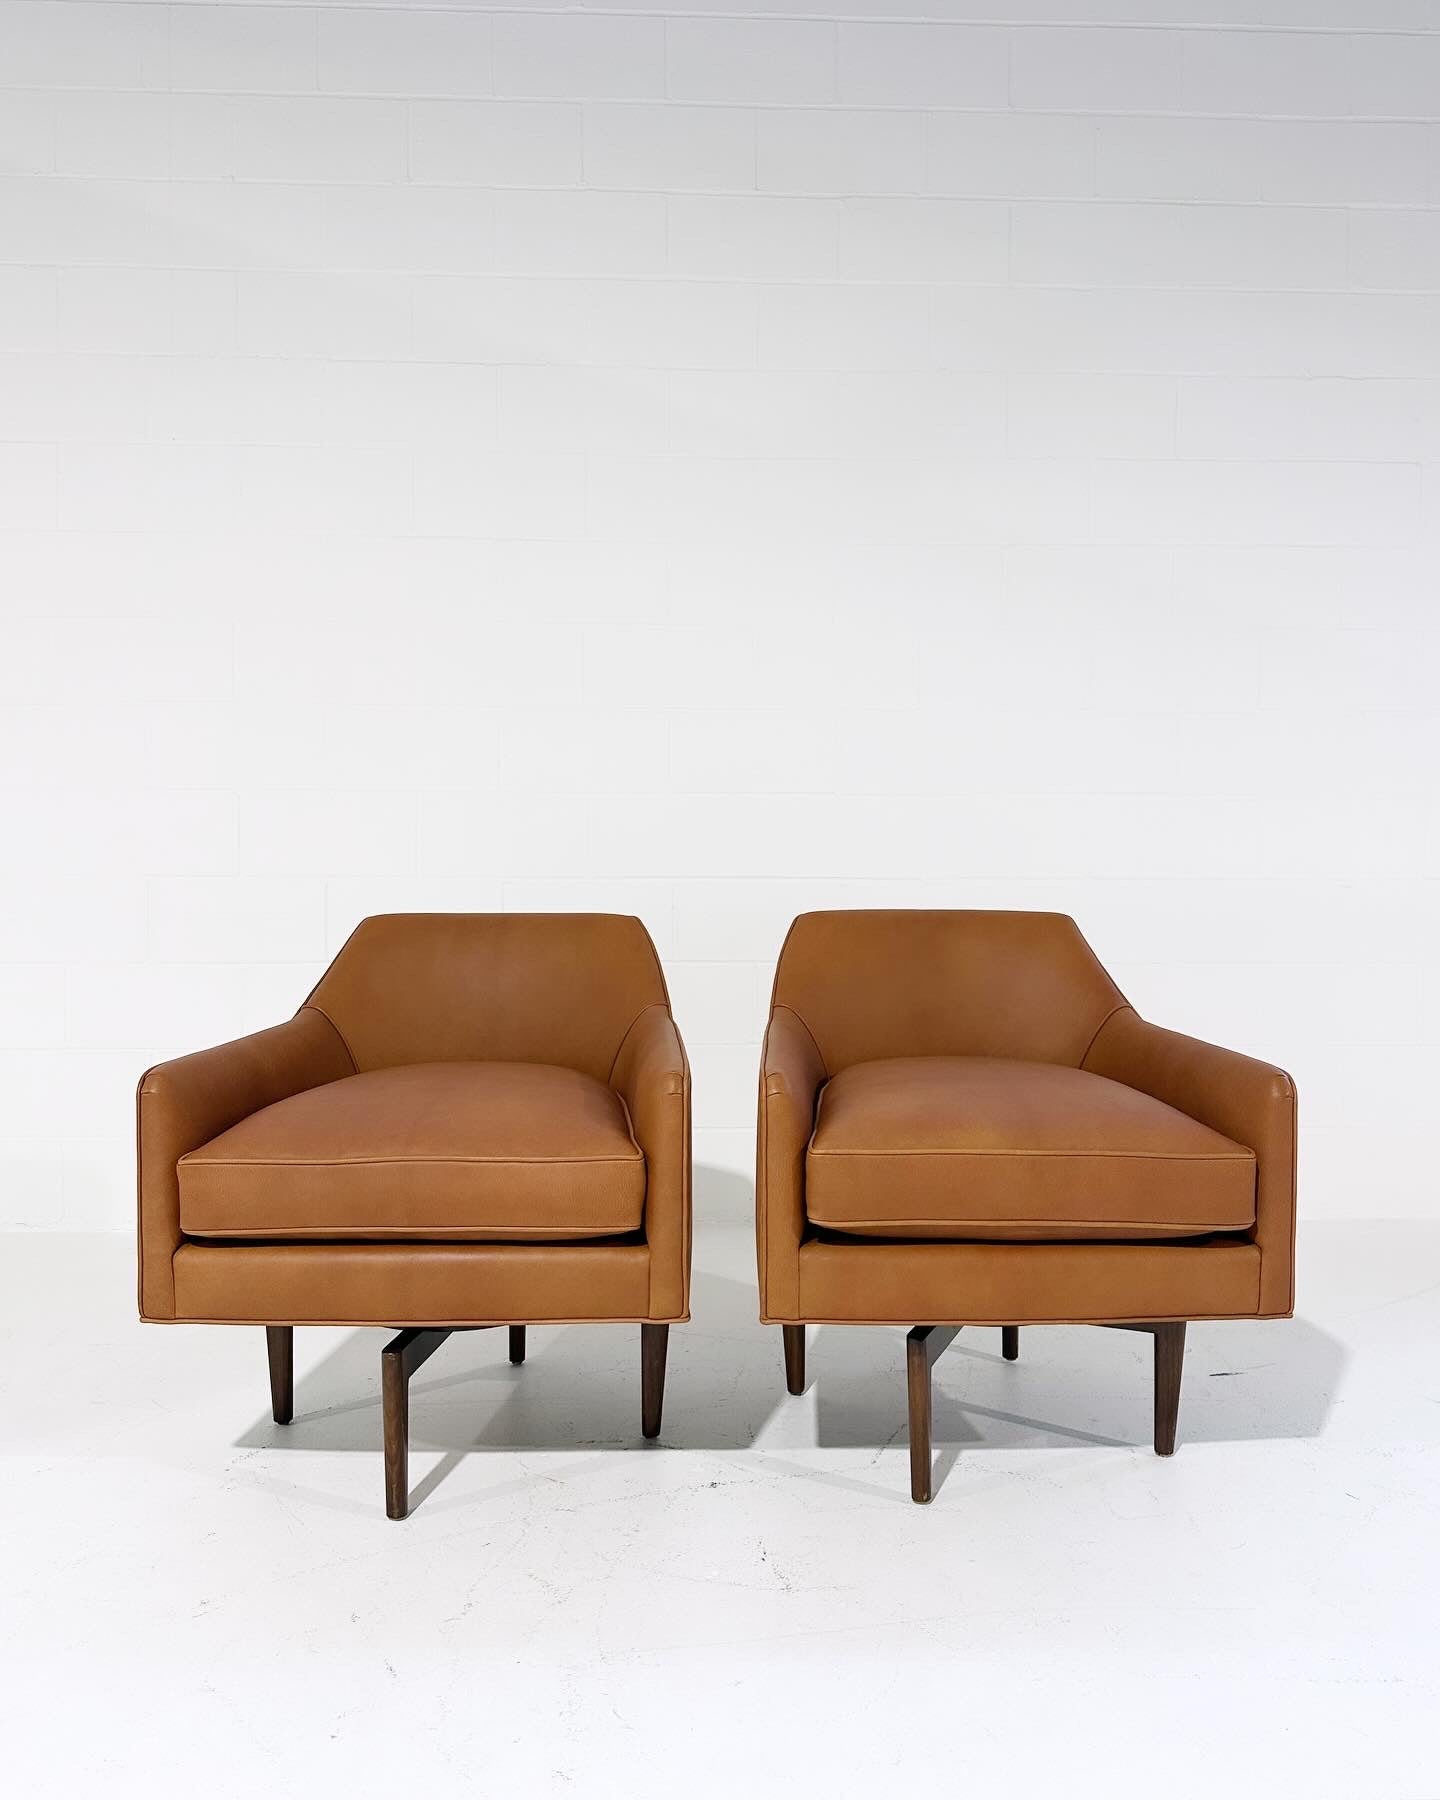 Swivel Chairs in Goatskin Leather, pair